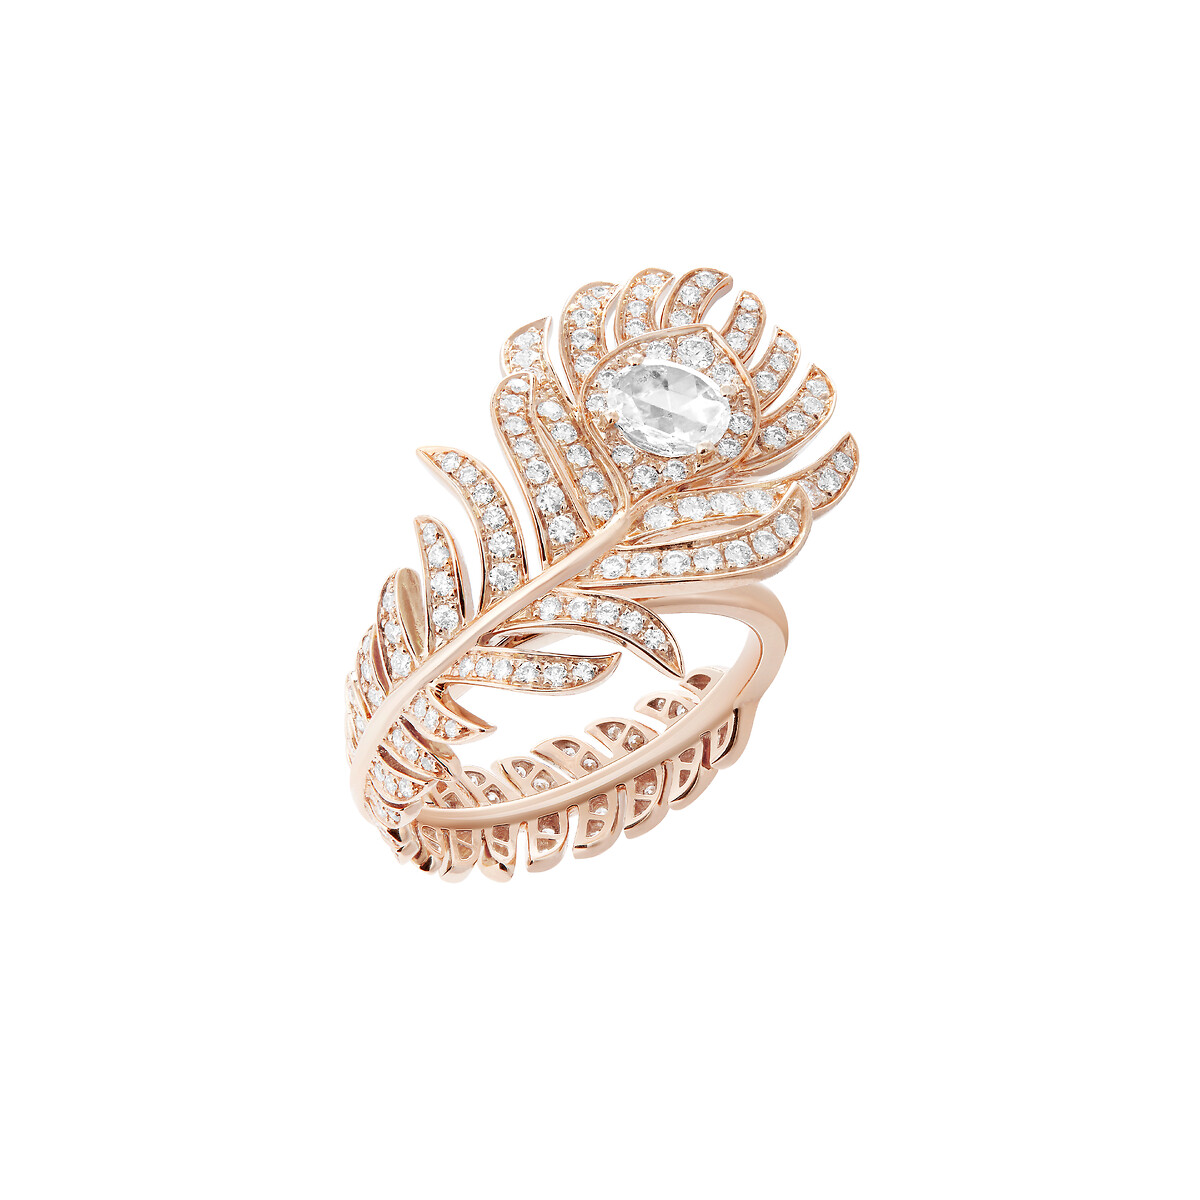 Plume de Paon small ring